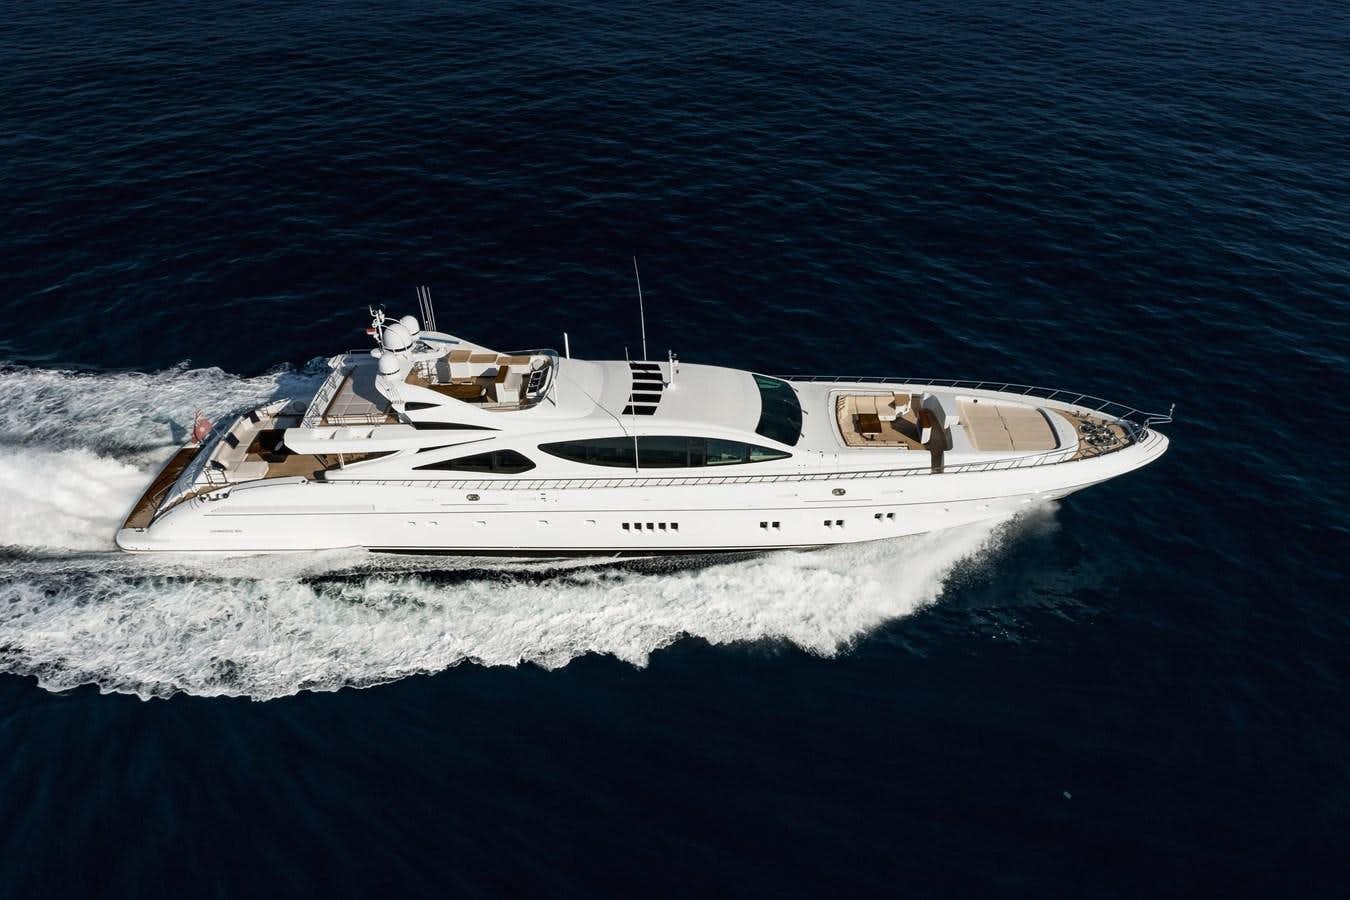 Royale x
Yacht for Sale